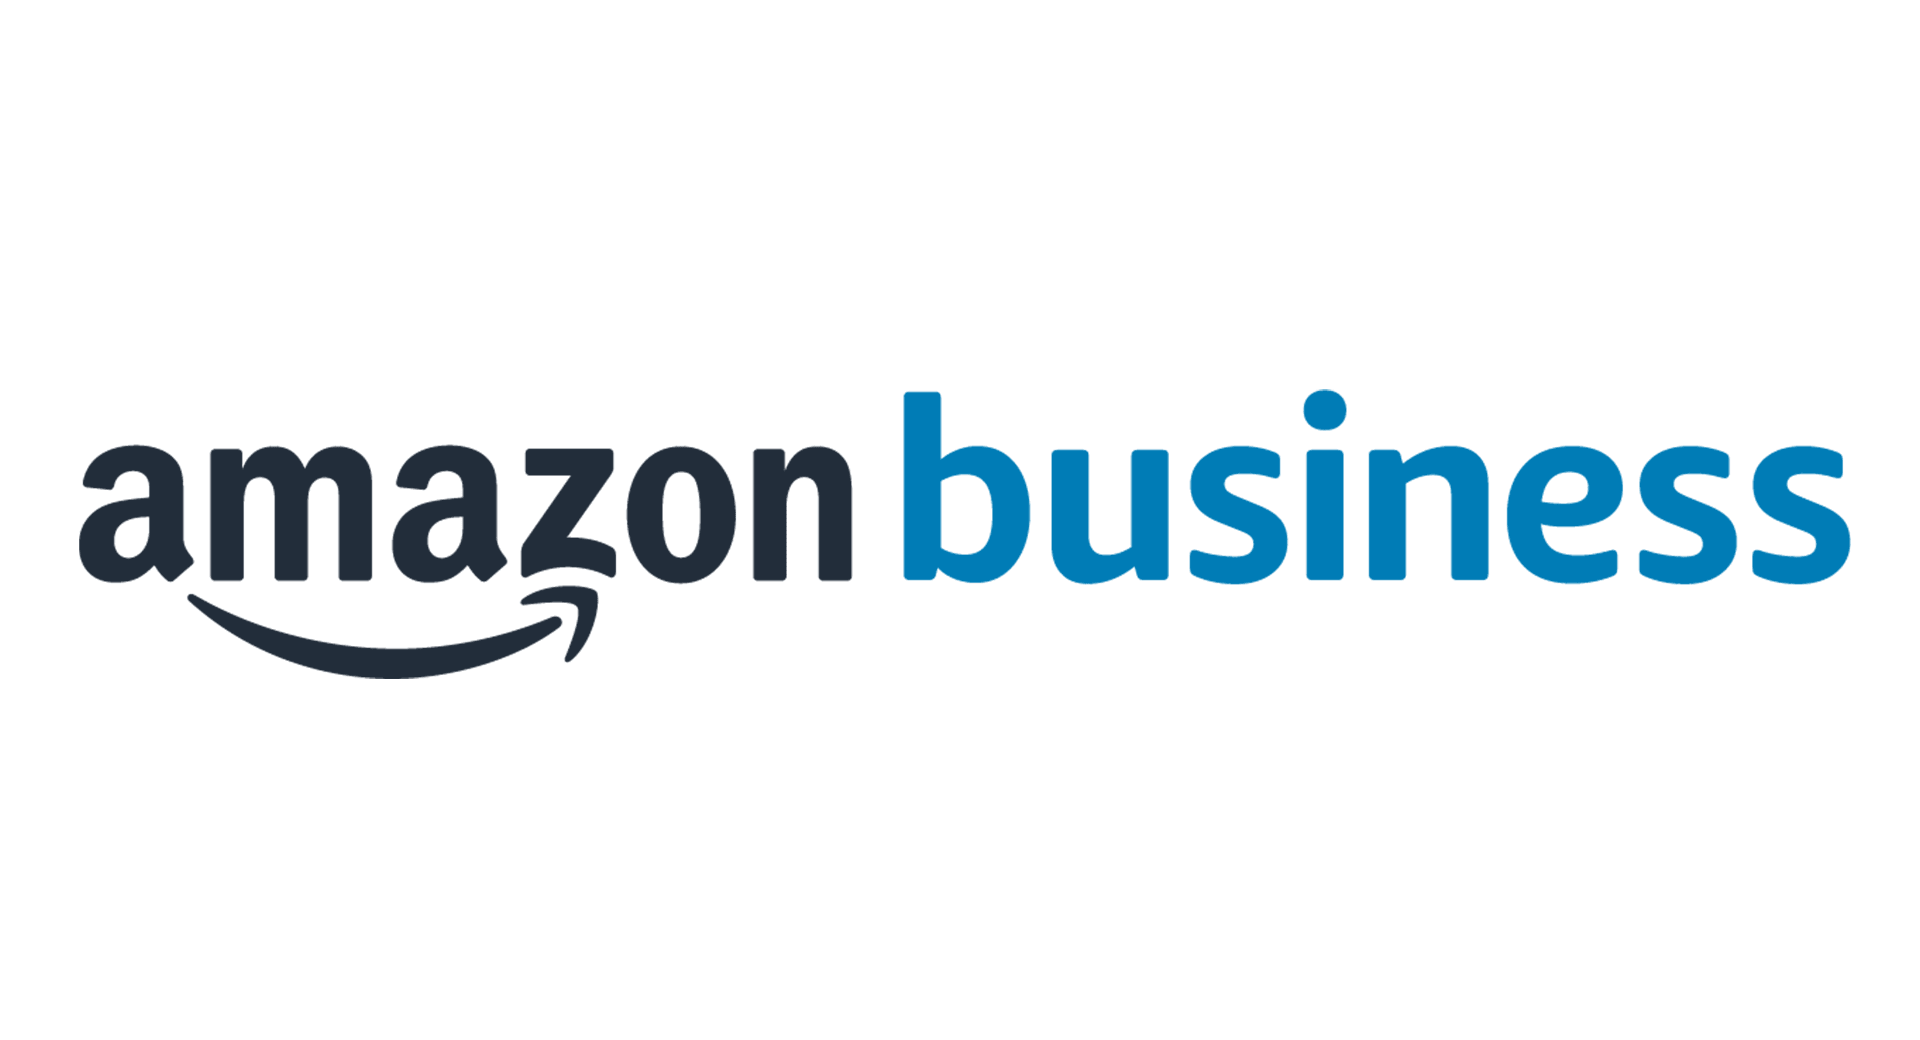 Guest Post: Skyward's Ecommerce Partnership with Amazon Business